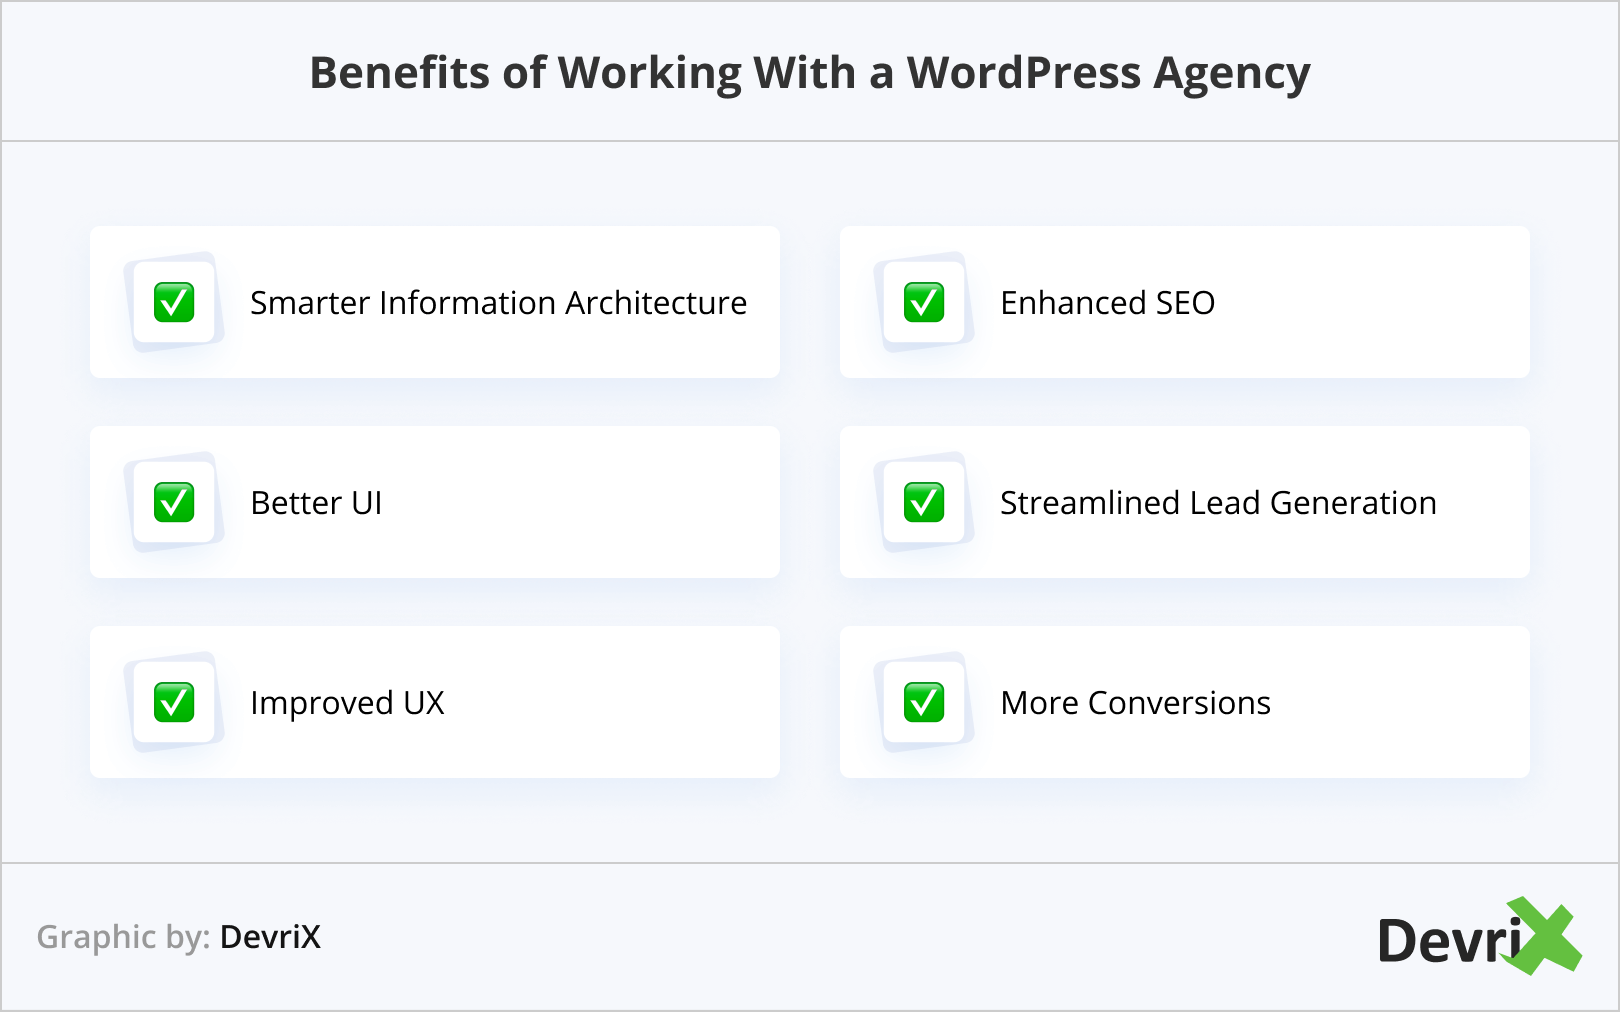 Benefits of Working With a WordPress Agency